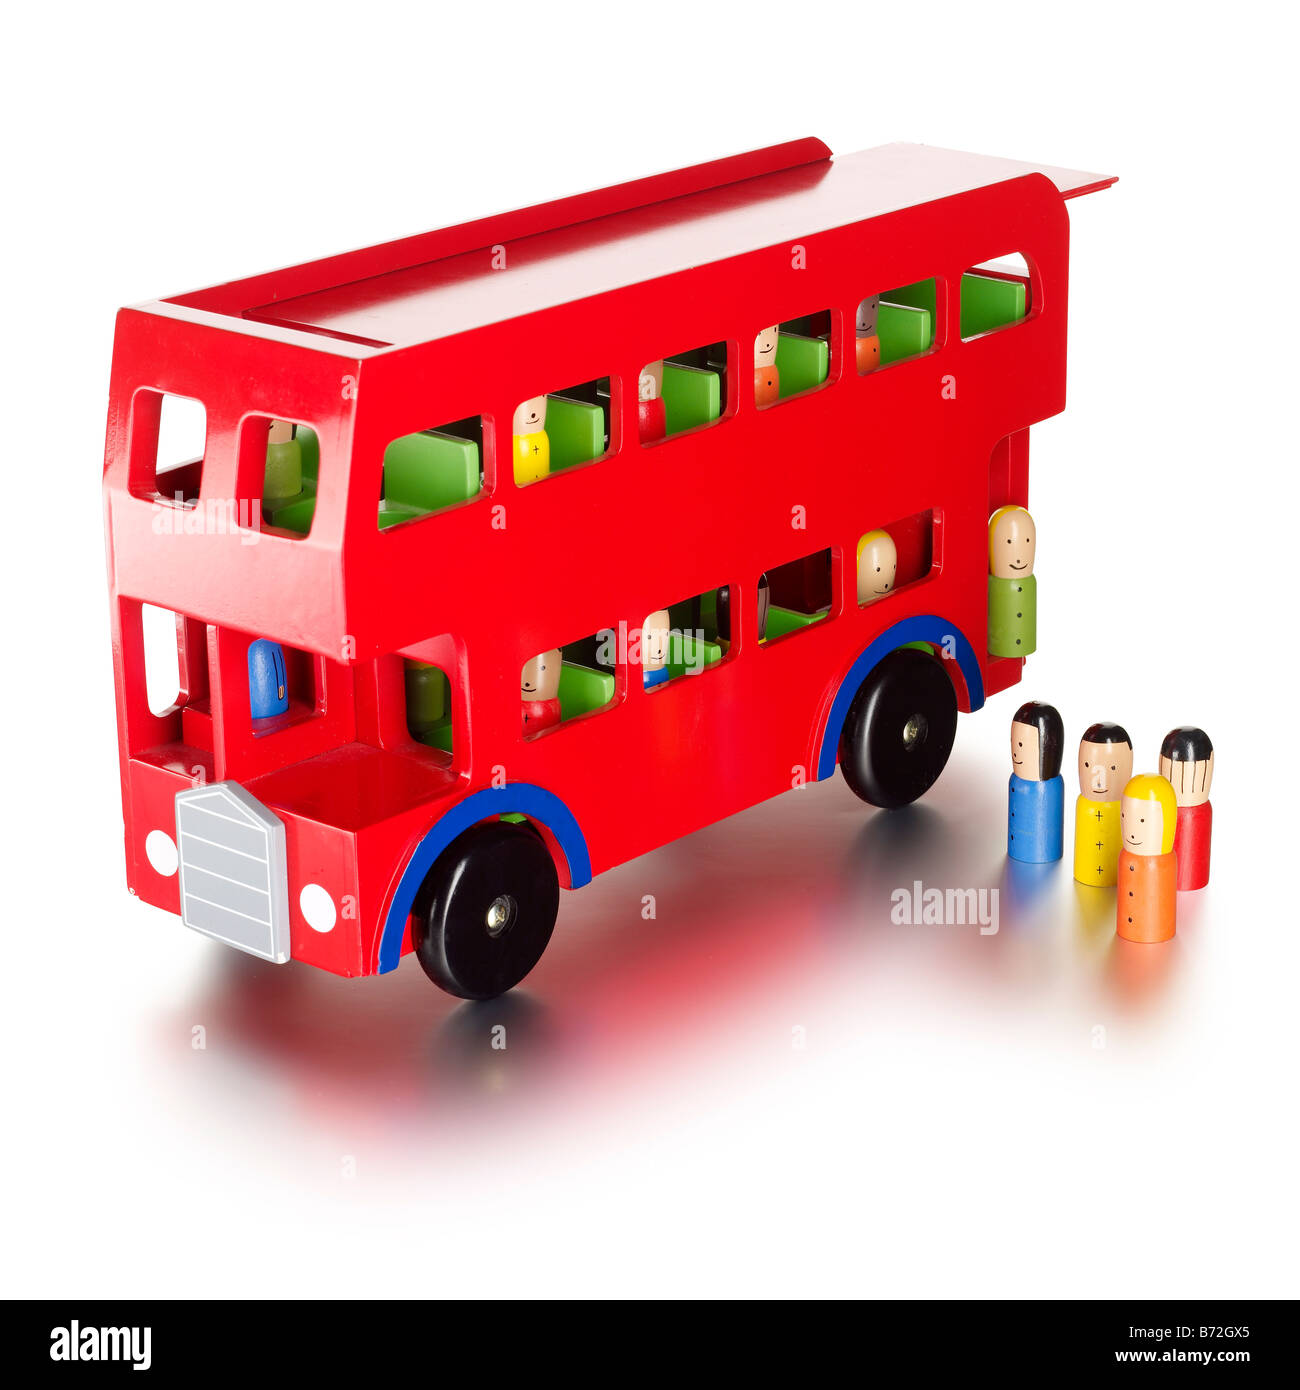 red toy wooden london bus Stock Photo